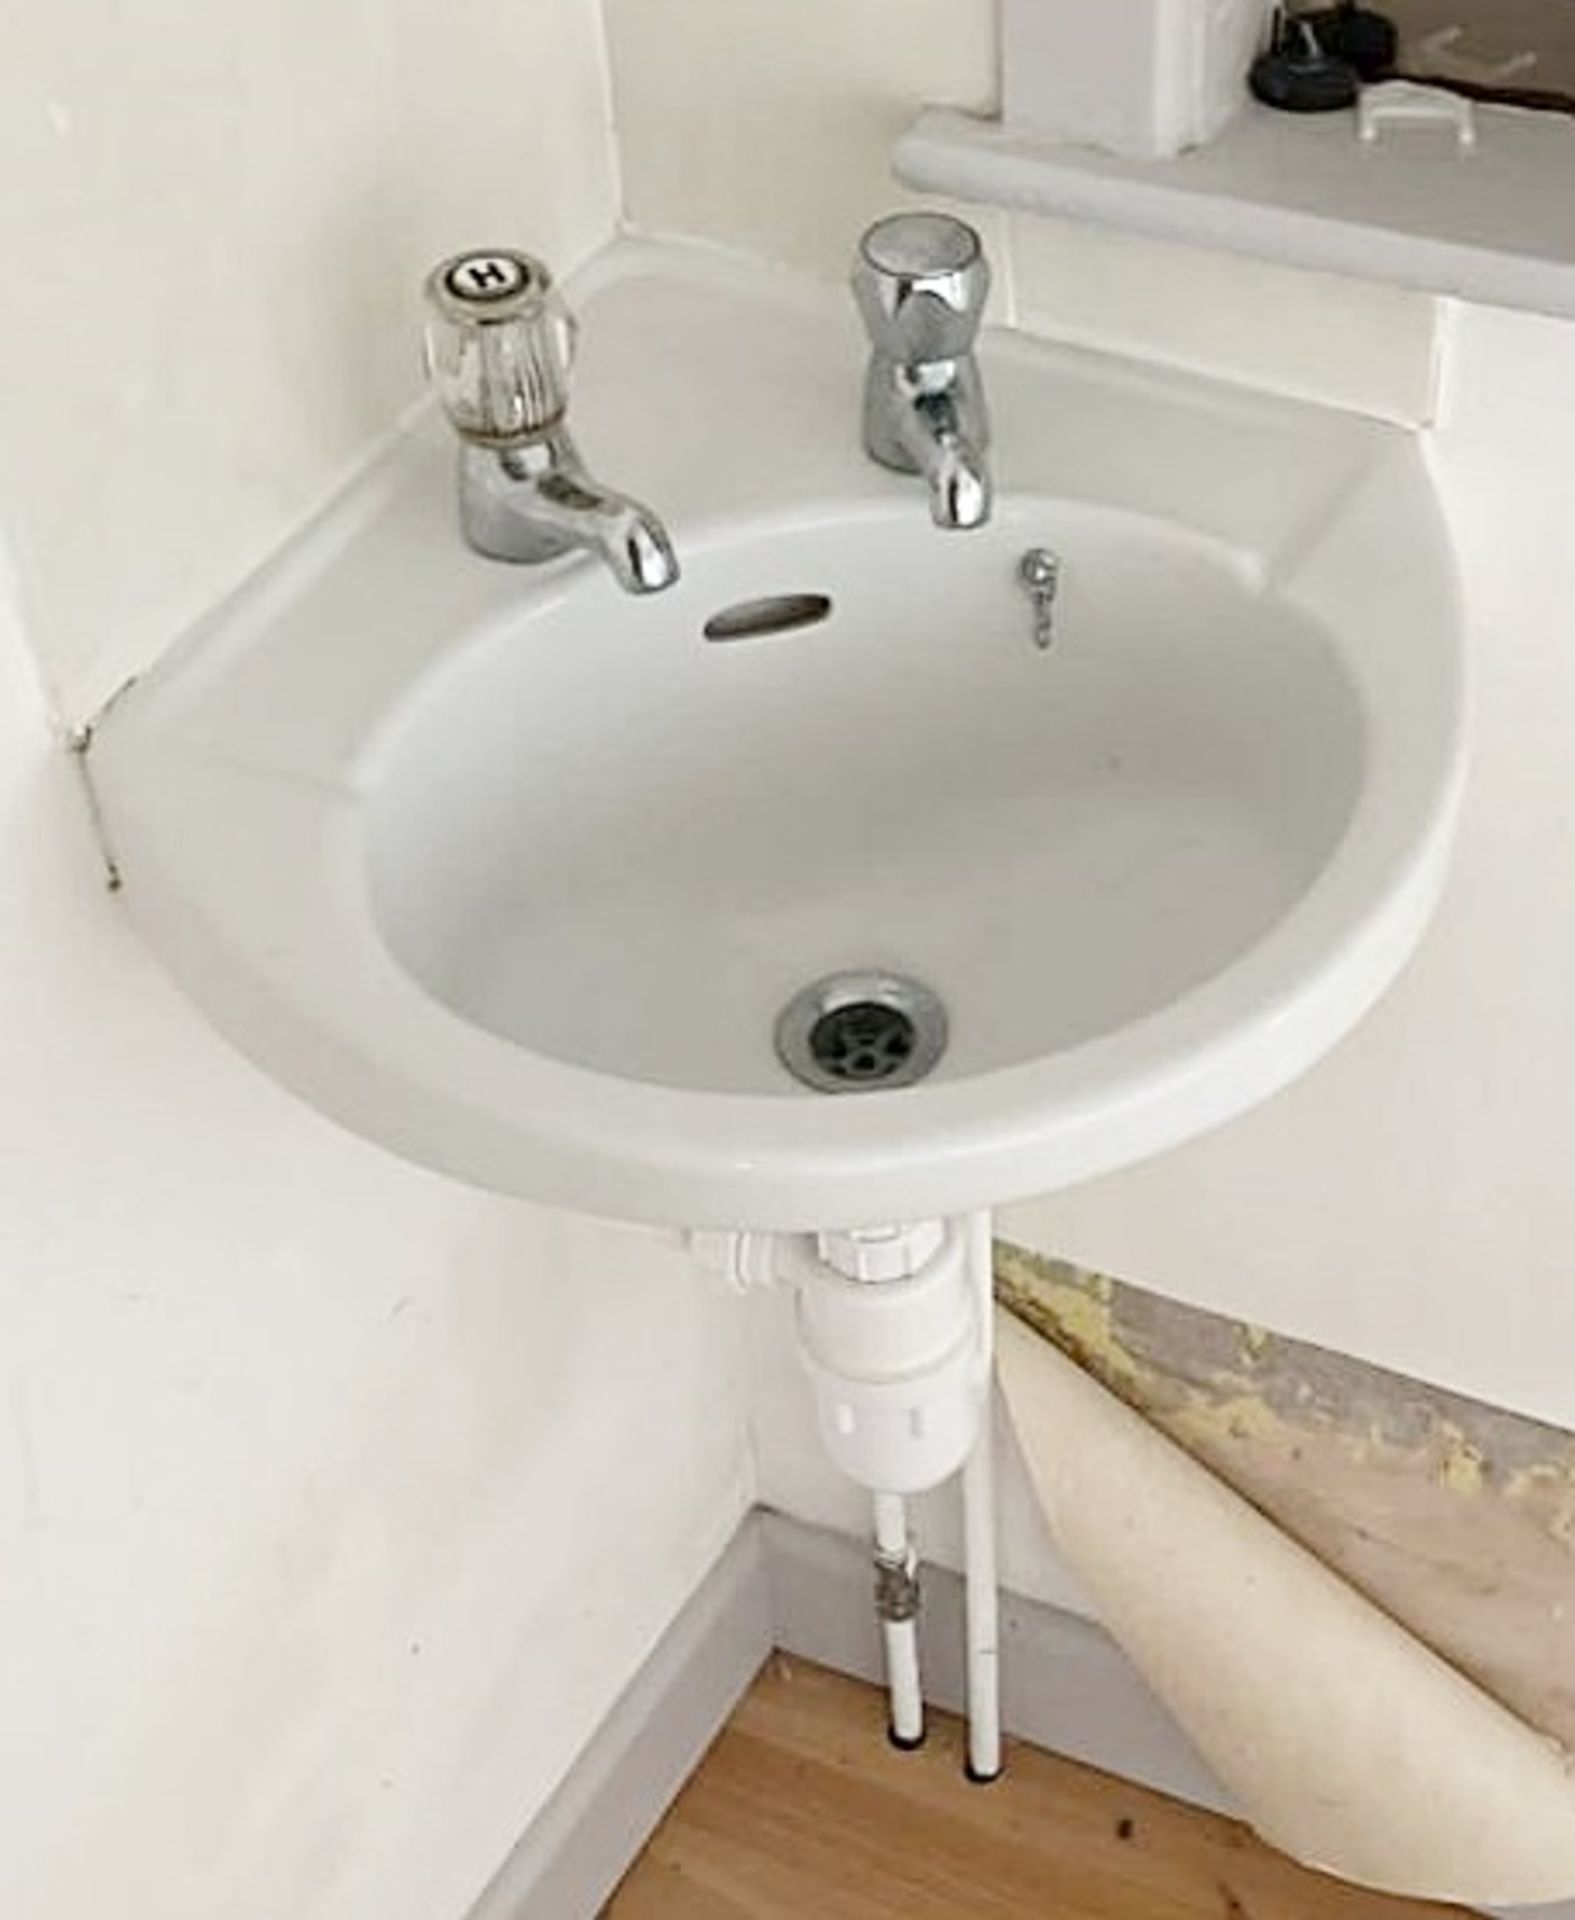 1 x Toilet And Wall Mounted Basin - To Be Removed From A Executive Office Environment - CL681 - Ref: - Image 2 of 2